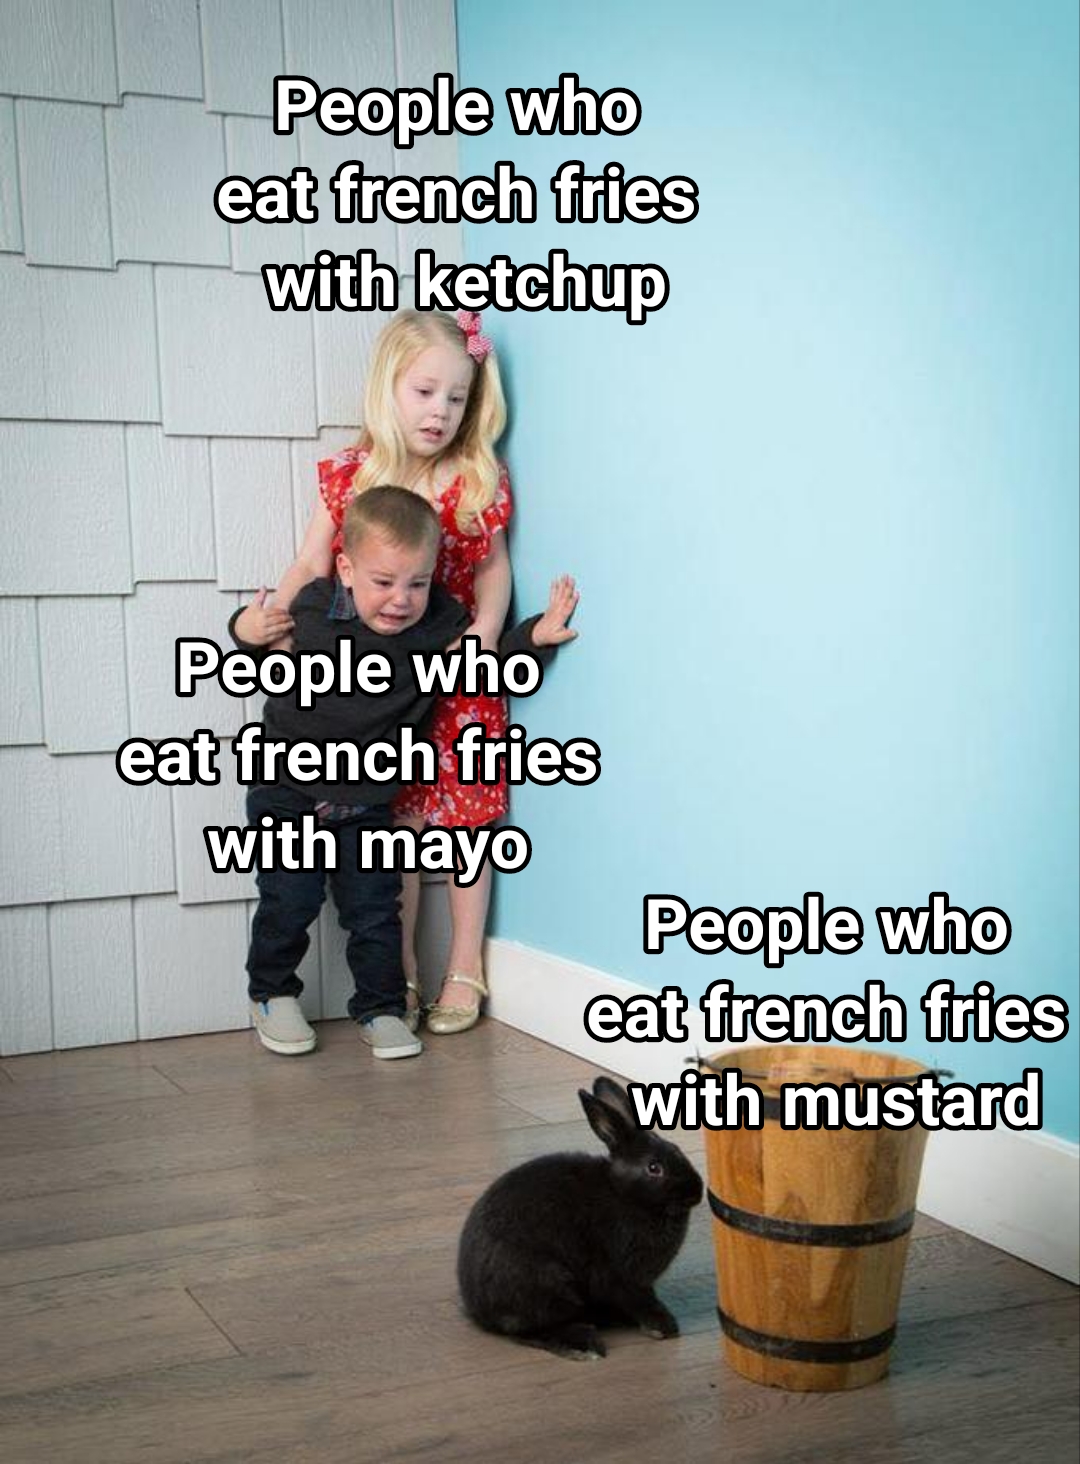 funny memes and pics - early morning memes - People who eat french fries with ketchup People who eat french fries with mayo People who eat french fries with mustard